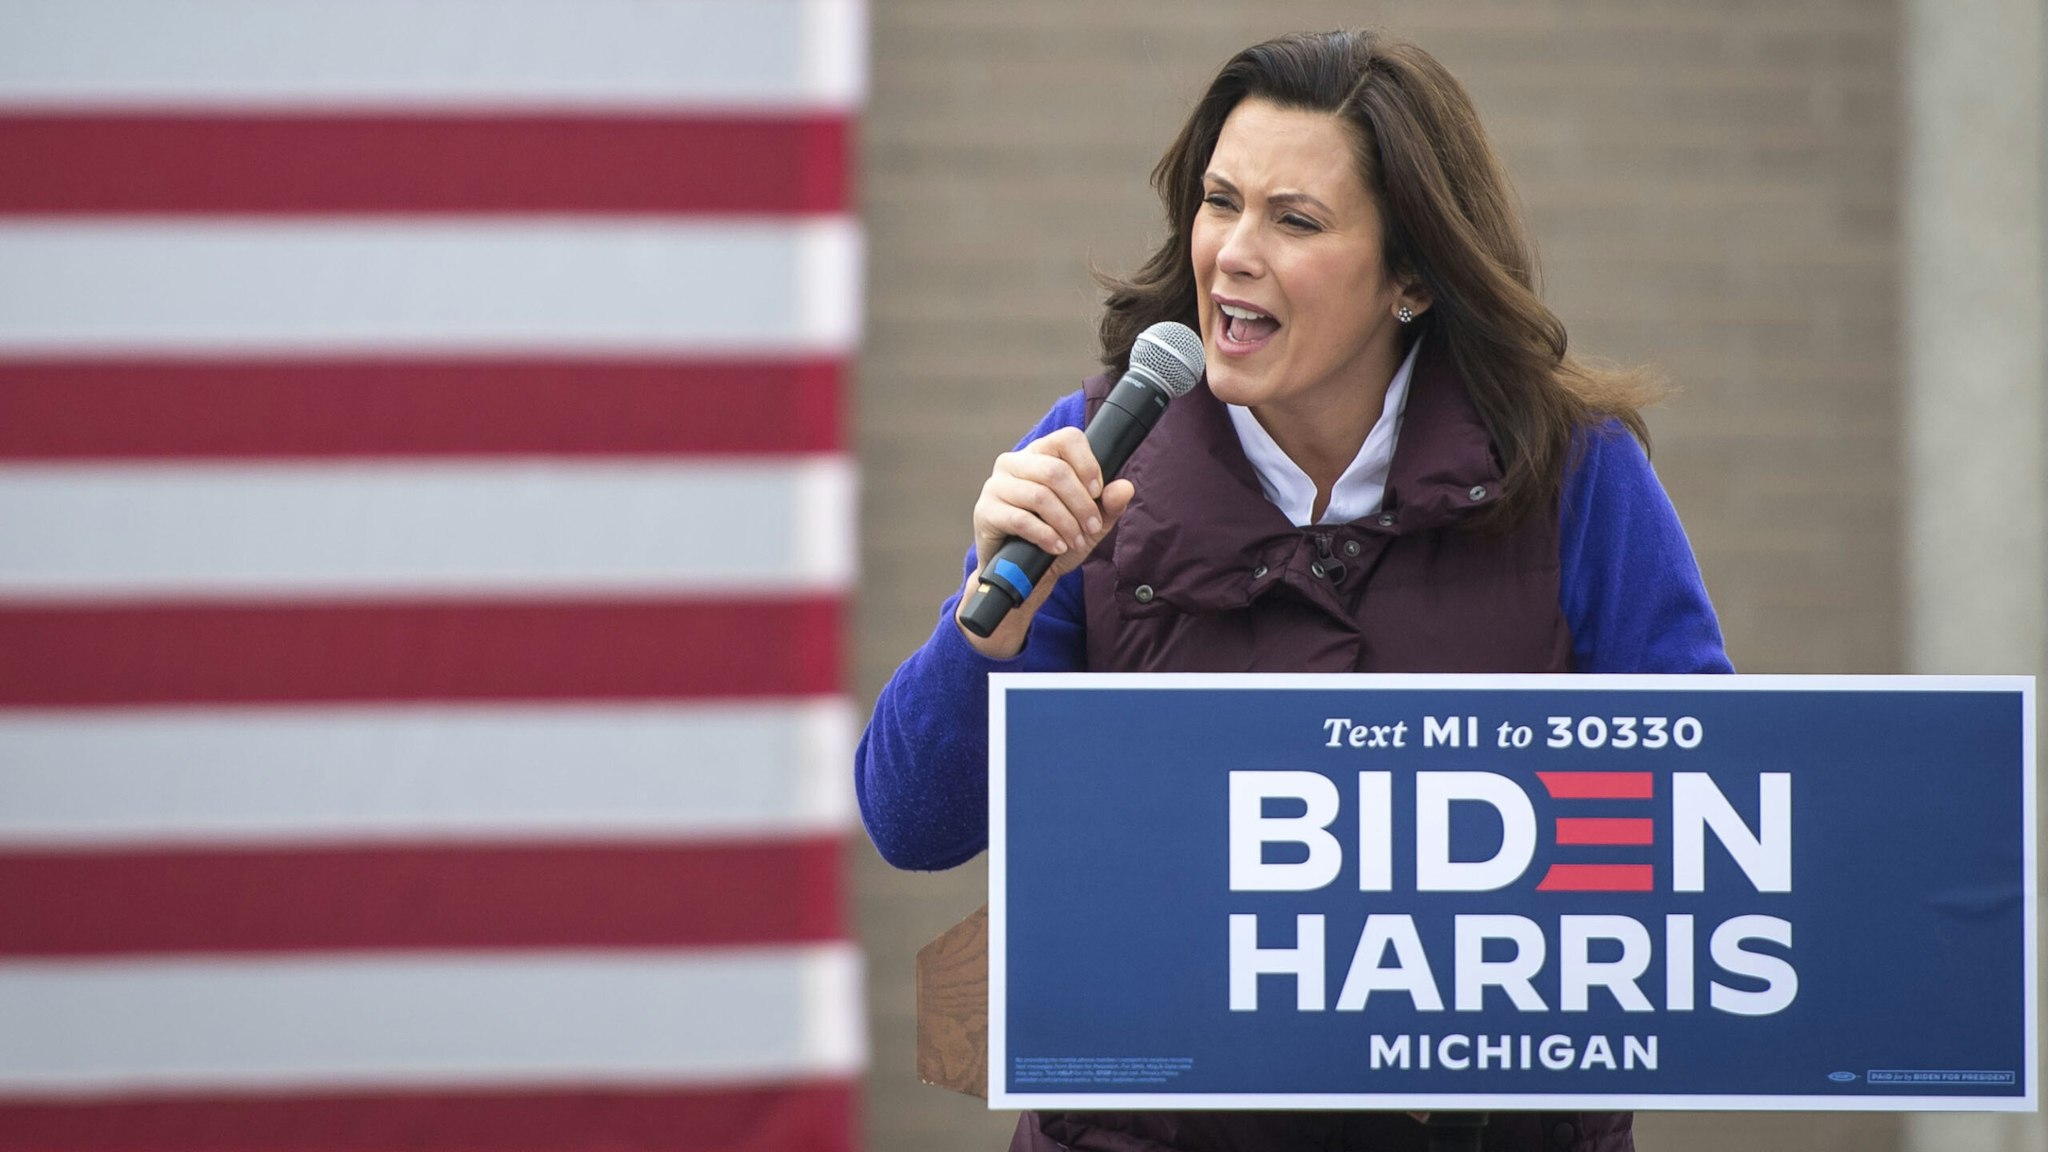 DETROIT, MI - OCTOBER 25: Michigan Governor Gretchen Whitmer speaks before Democratic U.S. Vice Presidential nominee Sen. Kamala Harris (D-CA) appears at IBEW Local Union 58 on October 25, 2020 in Detroit, Michigan. Harris is traveling to multiple locations in the metro Detroit area to campaign for Democratic presidential nominee Joe Biden.